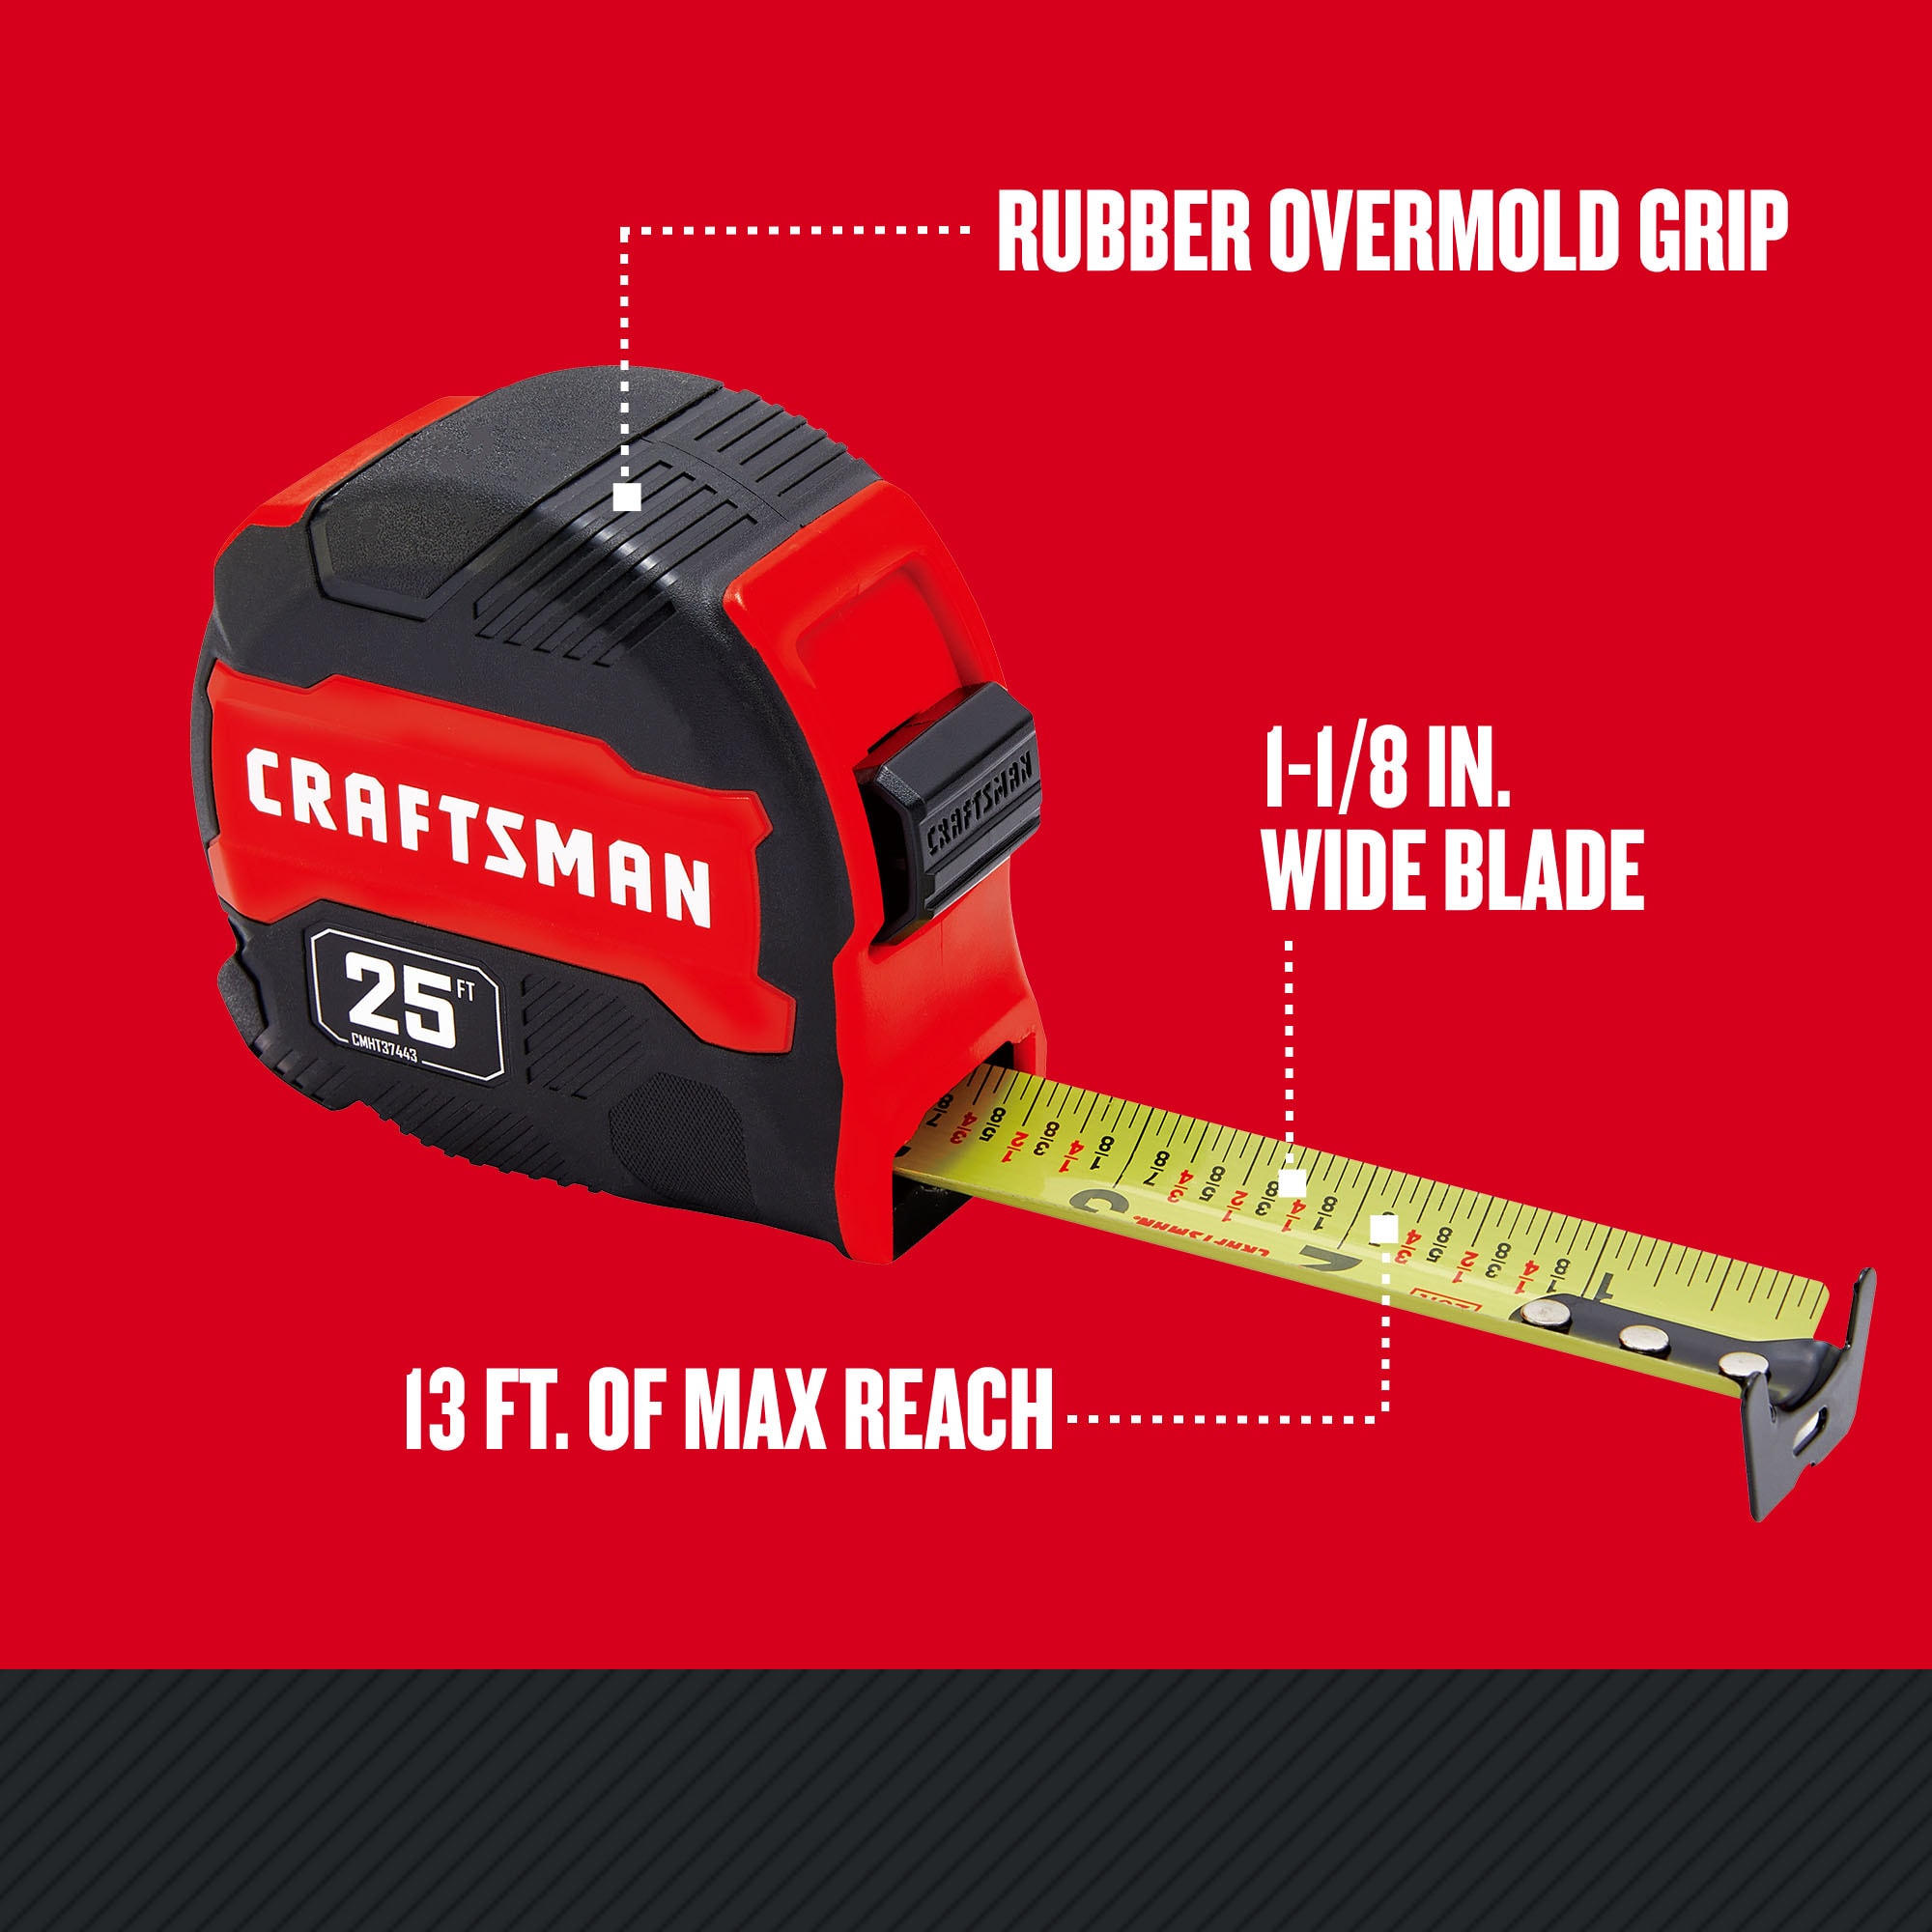 Craftsman Tape Measure, 25-Foot (CMHT37365S) and similar items